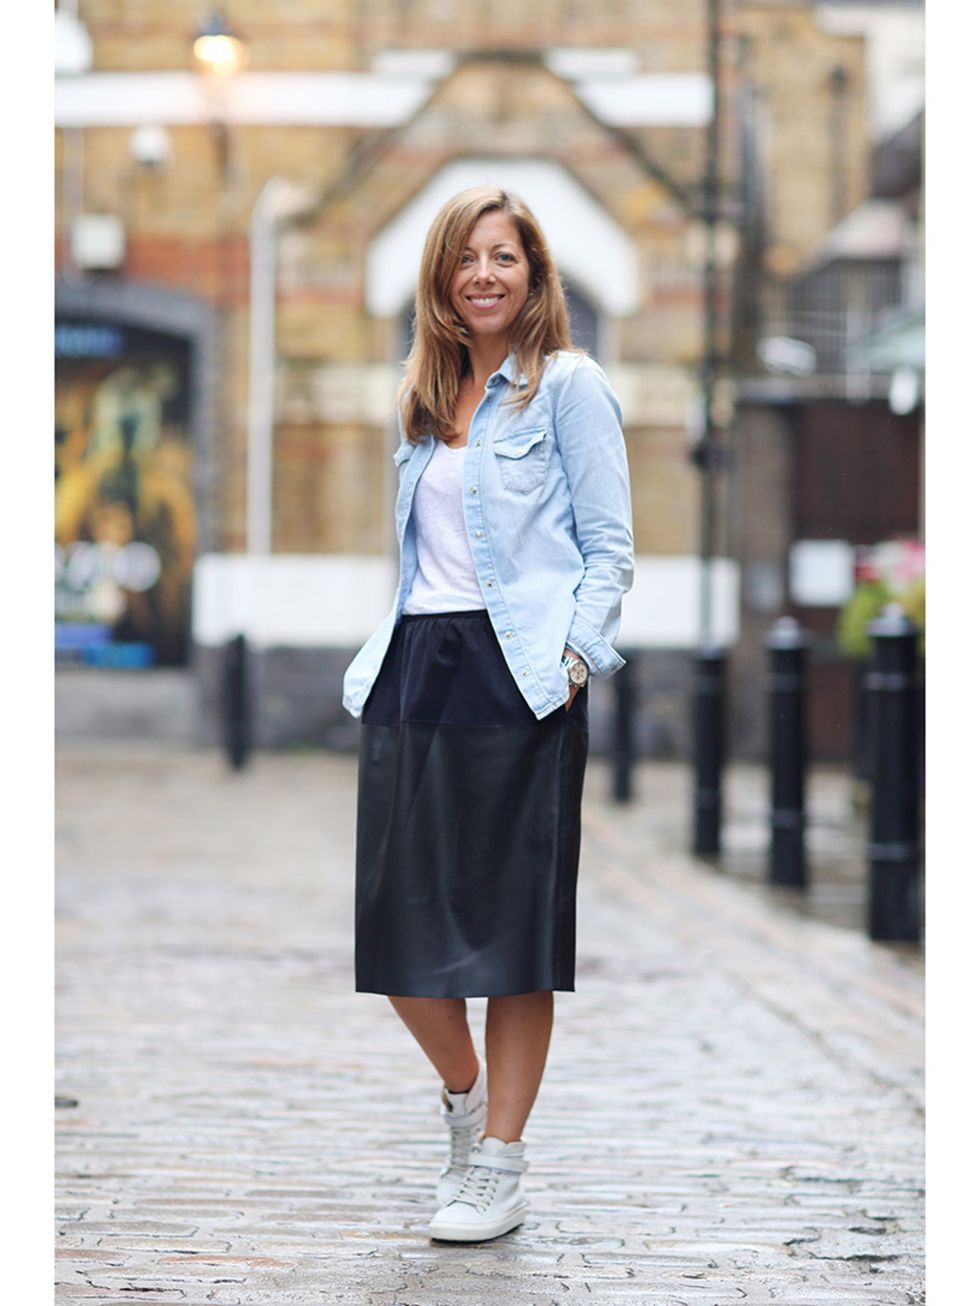 Kirsty Dale, Executive Fashion Director
Topshop shirt, Massimo Dutti top, Zara skirt, Whistles trainers, Swatch watch.